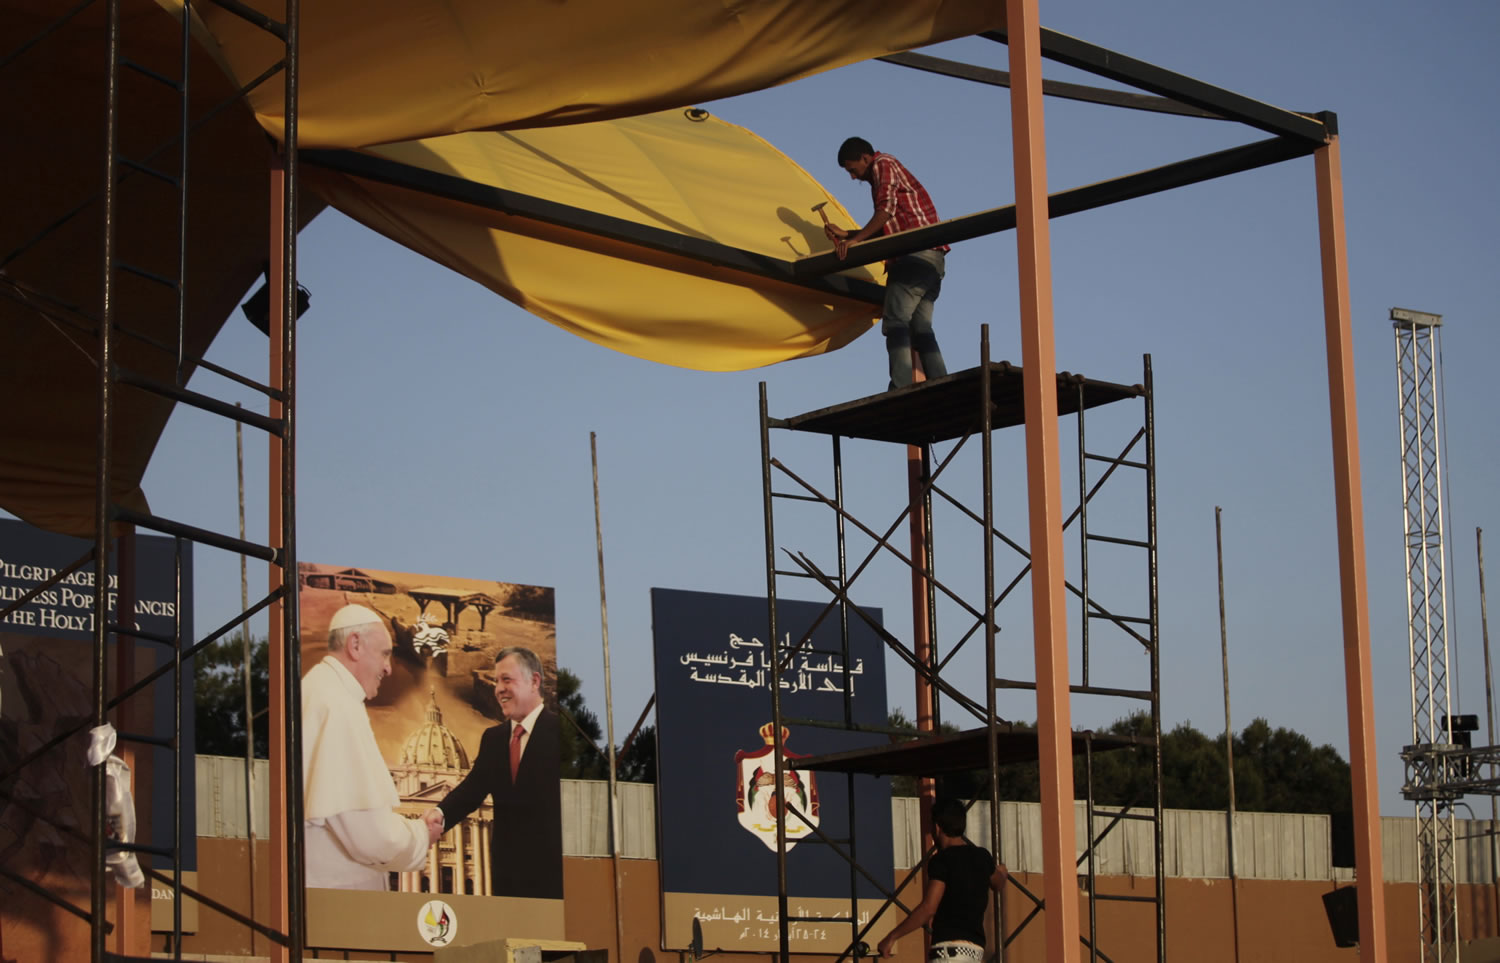 Workers make final preparations Thursday ahead of Saturday's Mass that will be conducted by Pope Francis at Amman International Stadium in Jordan.